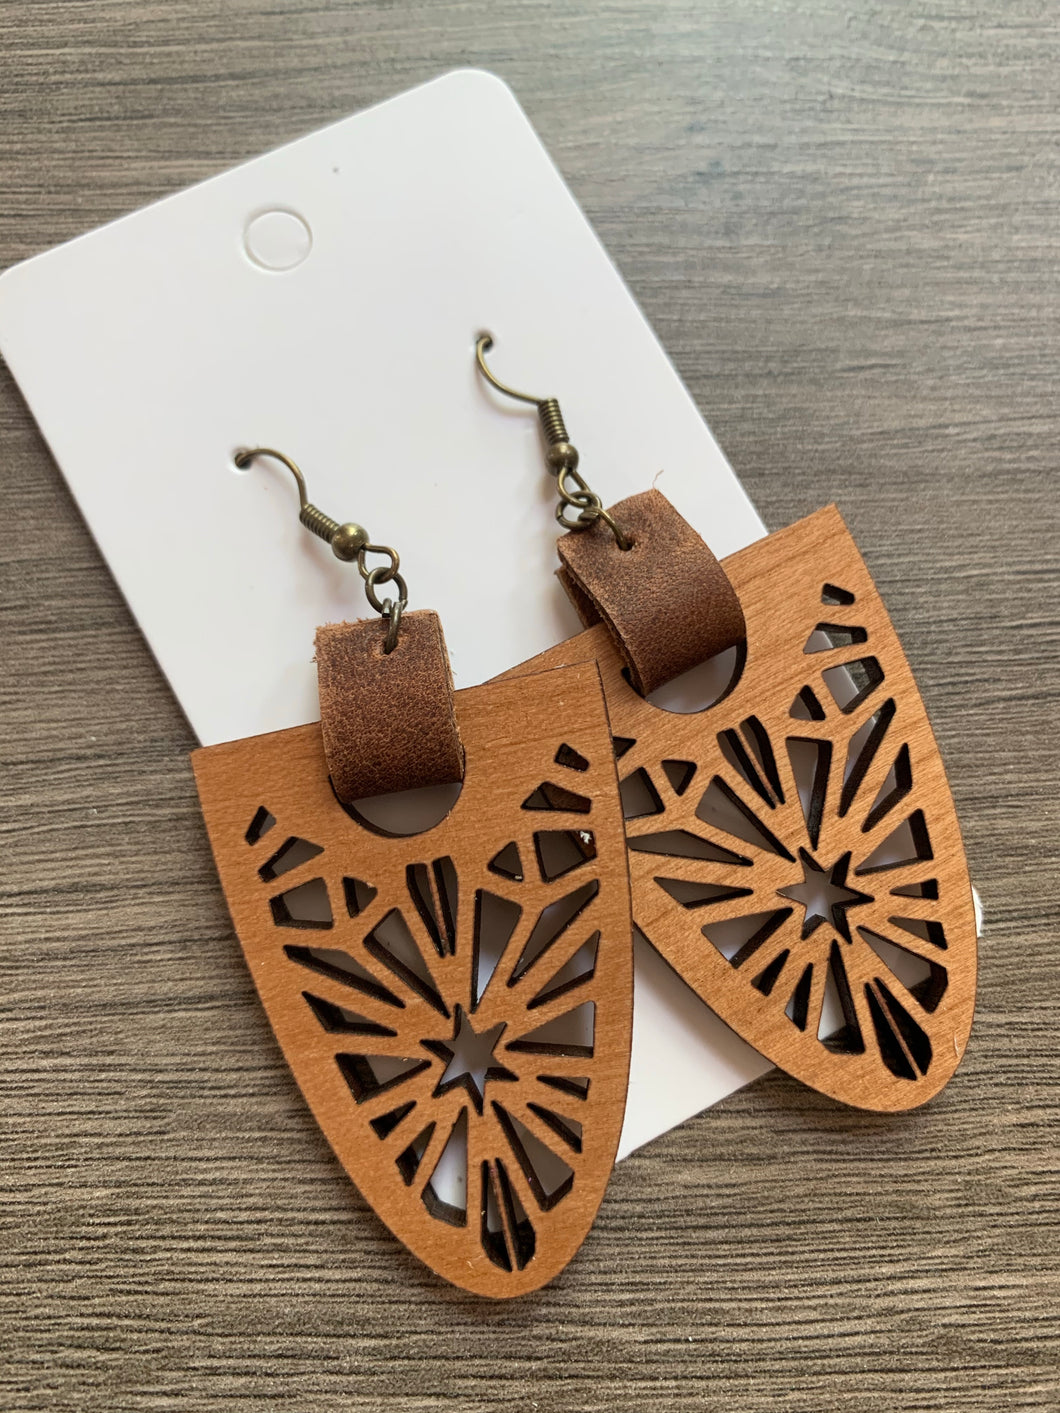 Wood and Leather Drop Earrings